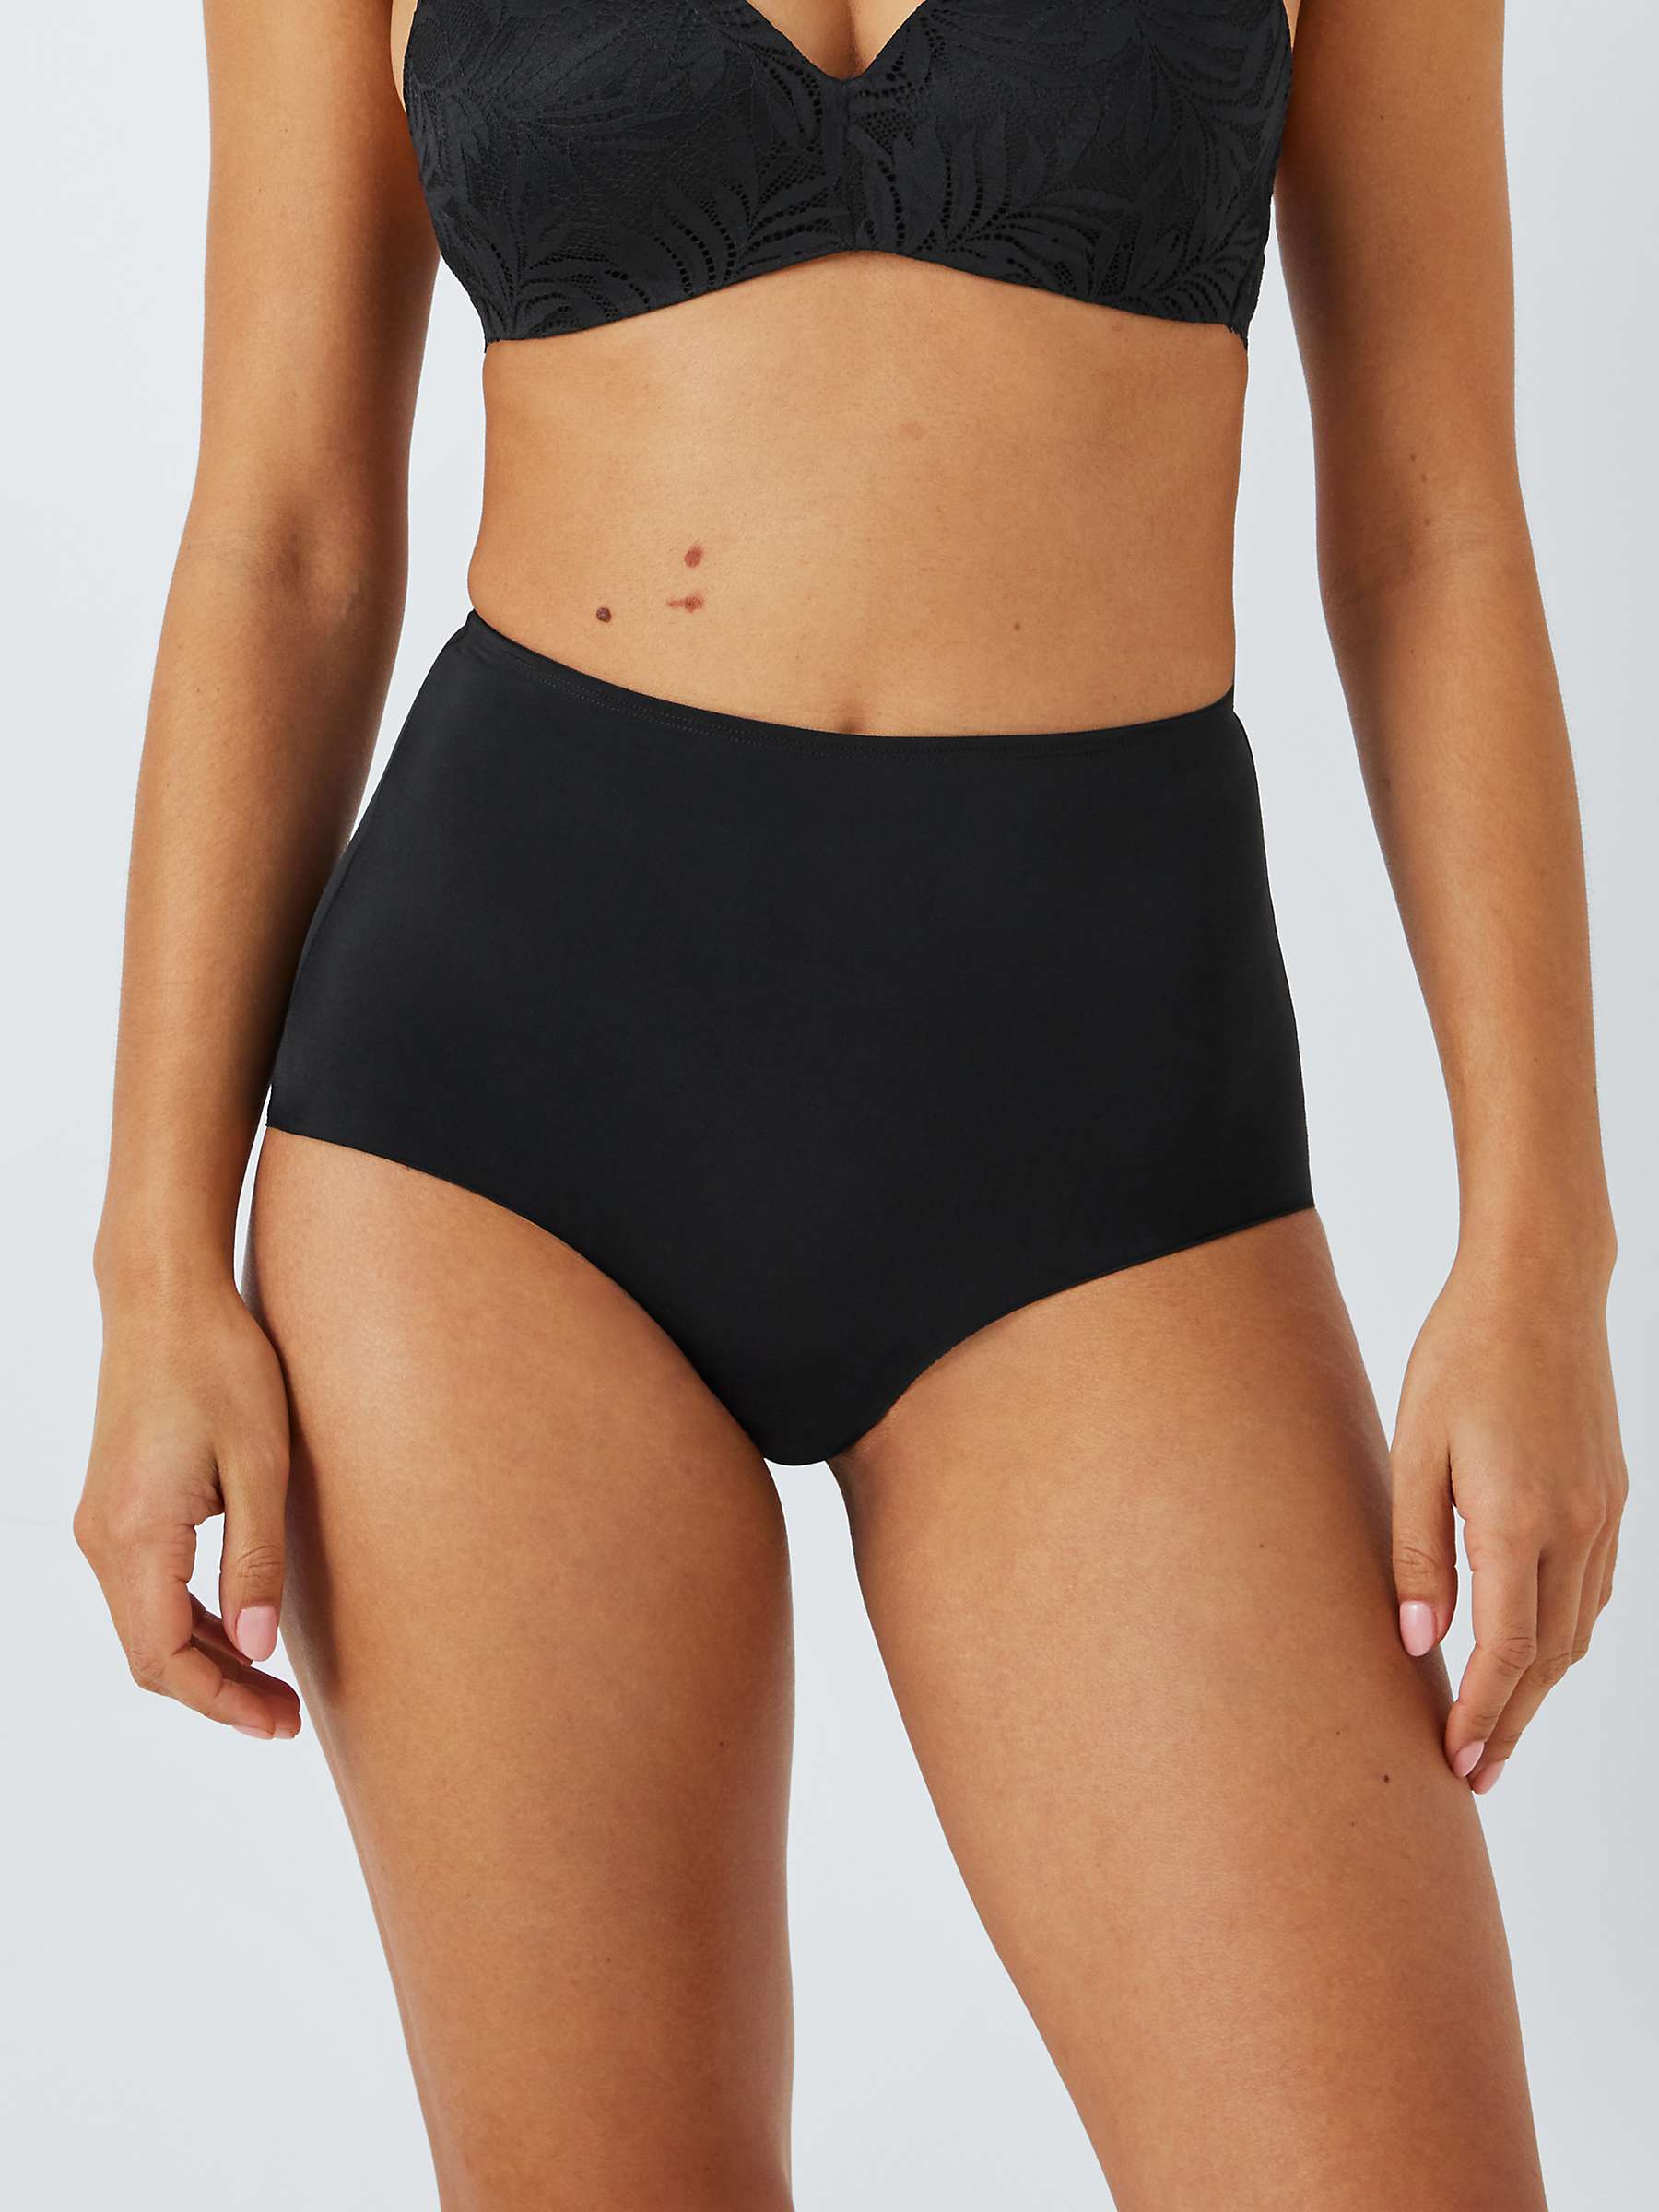 Buy John Lewis ANYDAY Full Shaping Knickers, Pack of 2 Online at johnlewis.com